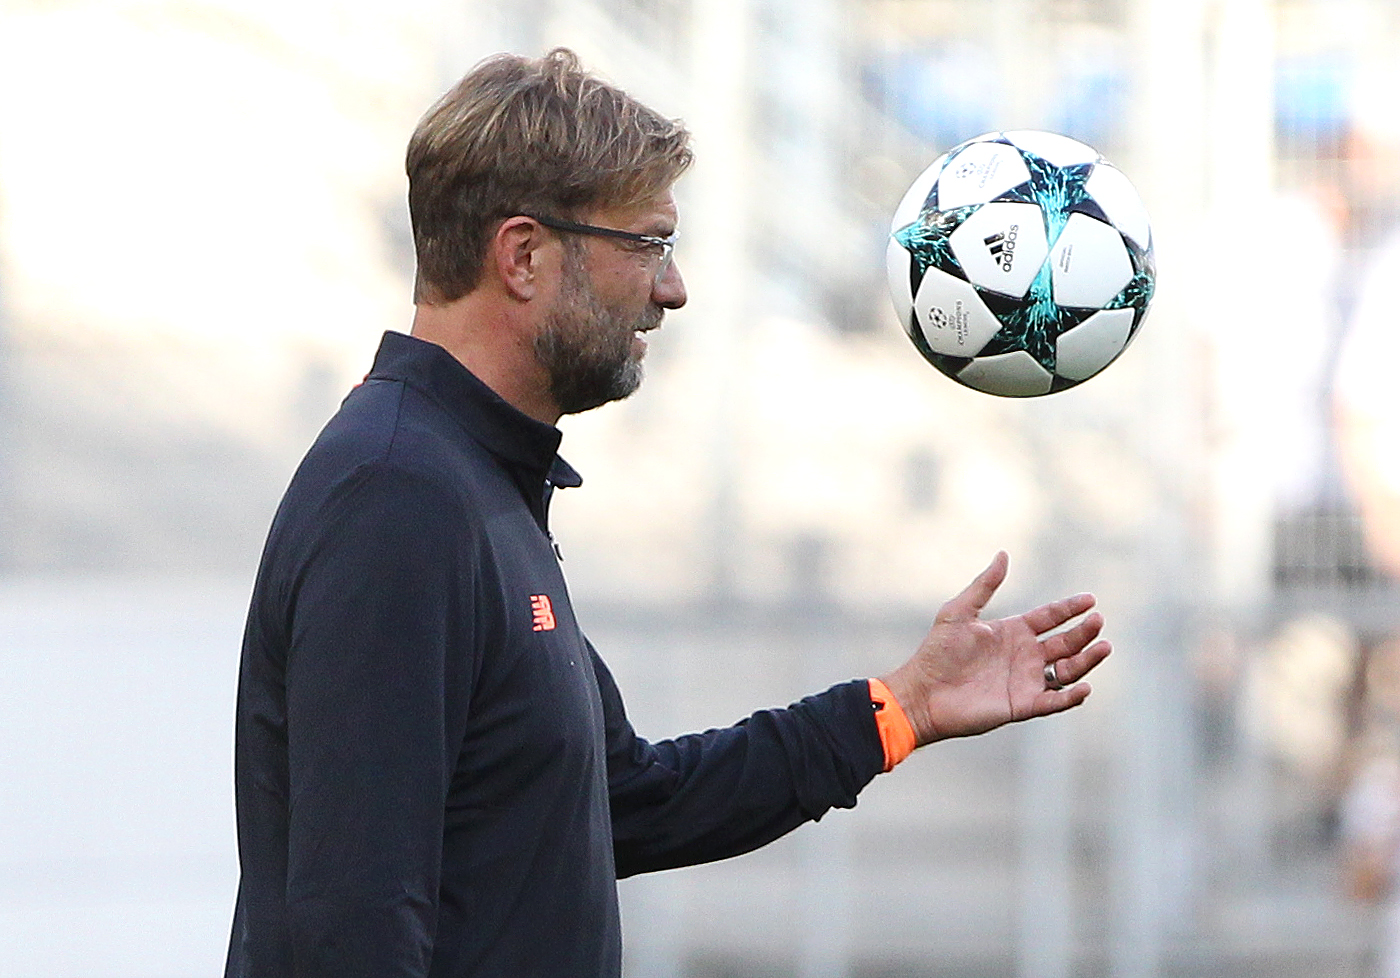 Liverpool's coach Juergen Klopp is pictured during a training session on August 14, 2017 in Sinsheim, Germany, on the eve of the Football Champions League qualifier match TSG 1899 Hoffenheim vs Liverpool FC. / AFP PHOTO / Daniel ROLAND        (Photo credit should read DANIEL ROLAND/AFP/Getty Images)